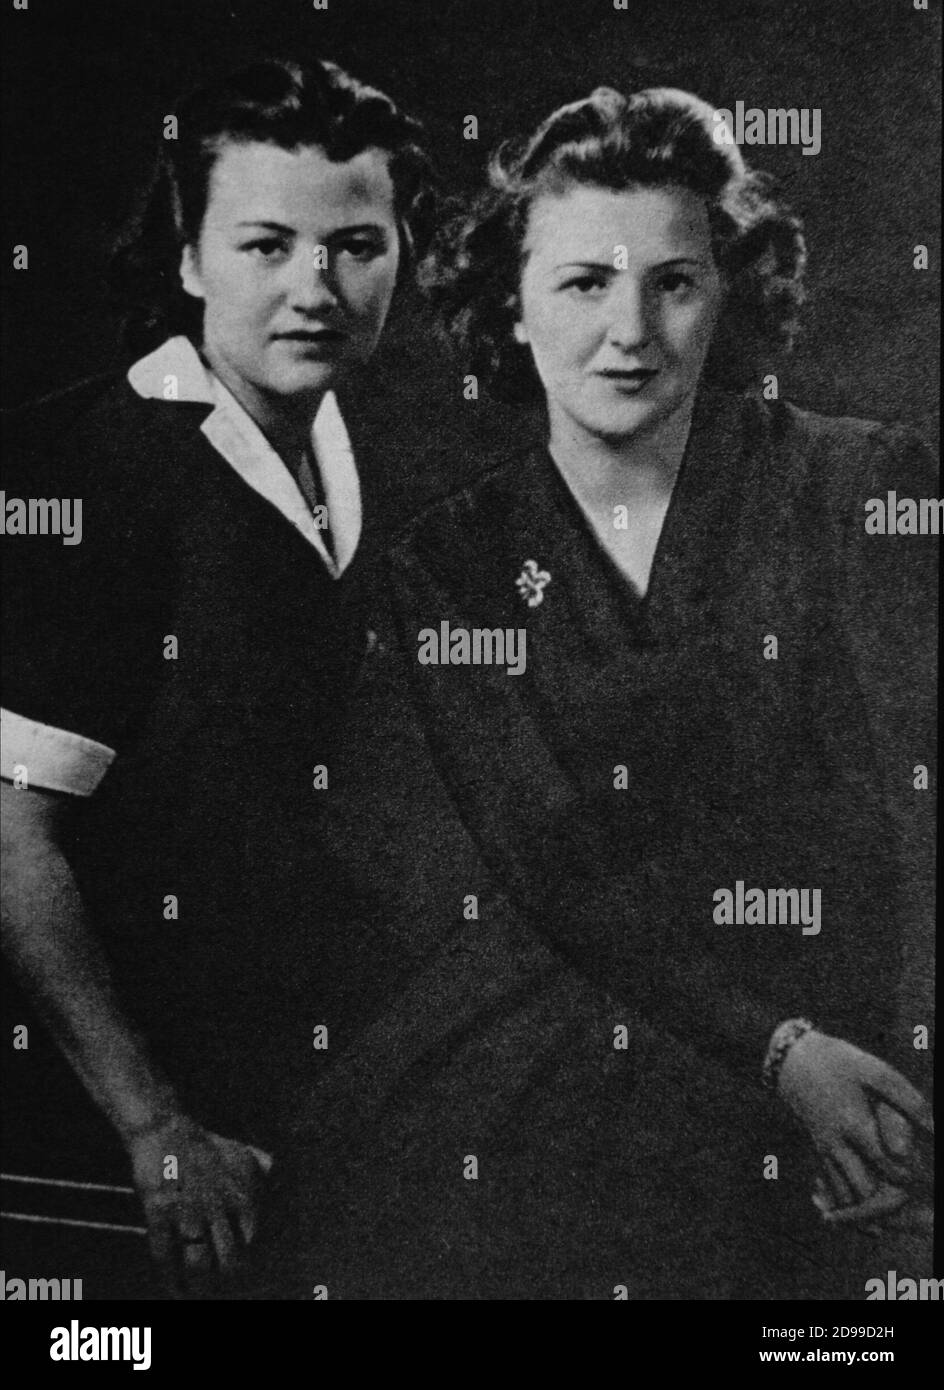 1940 a. :  The german EVA  BRAUN  ( Munich , Germany 1912 - Berlin , Germany 1945 ) , famous ADOLF HITLER mistress , with her sister in Munchen  NAZI - NAZIST - NAZISMO - WWII - SECONDA GUERRA MONDIALE  ----  ARCHIVIO   GBB Stock Photo